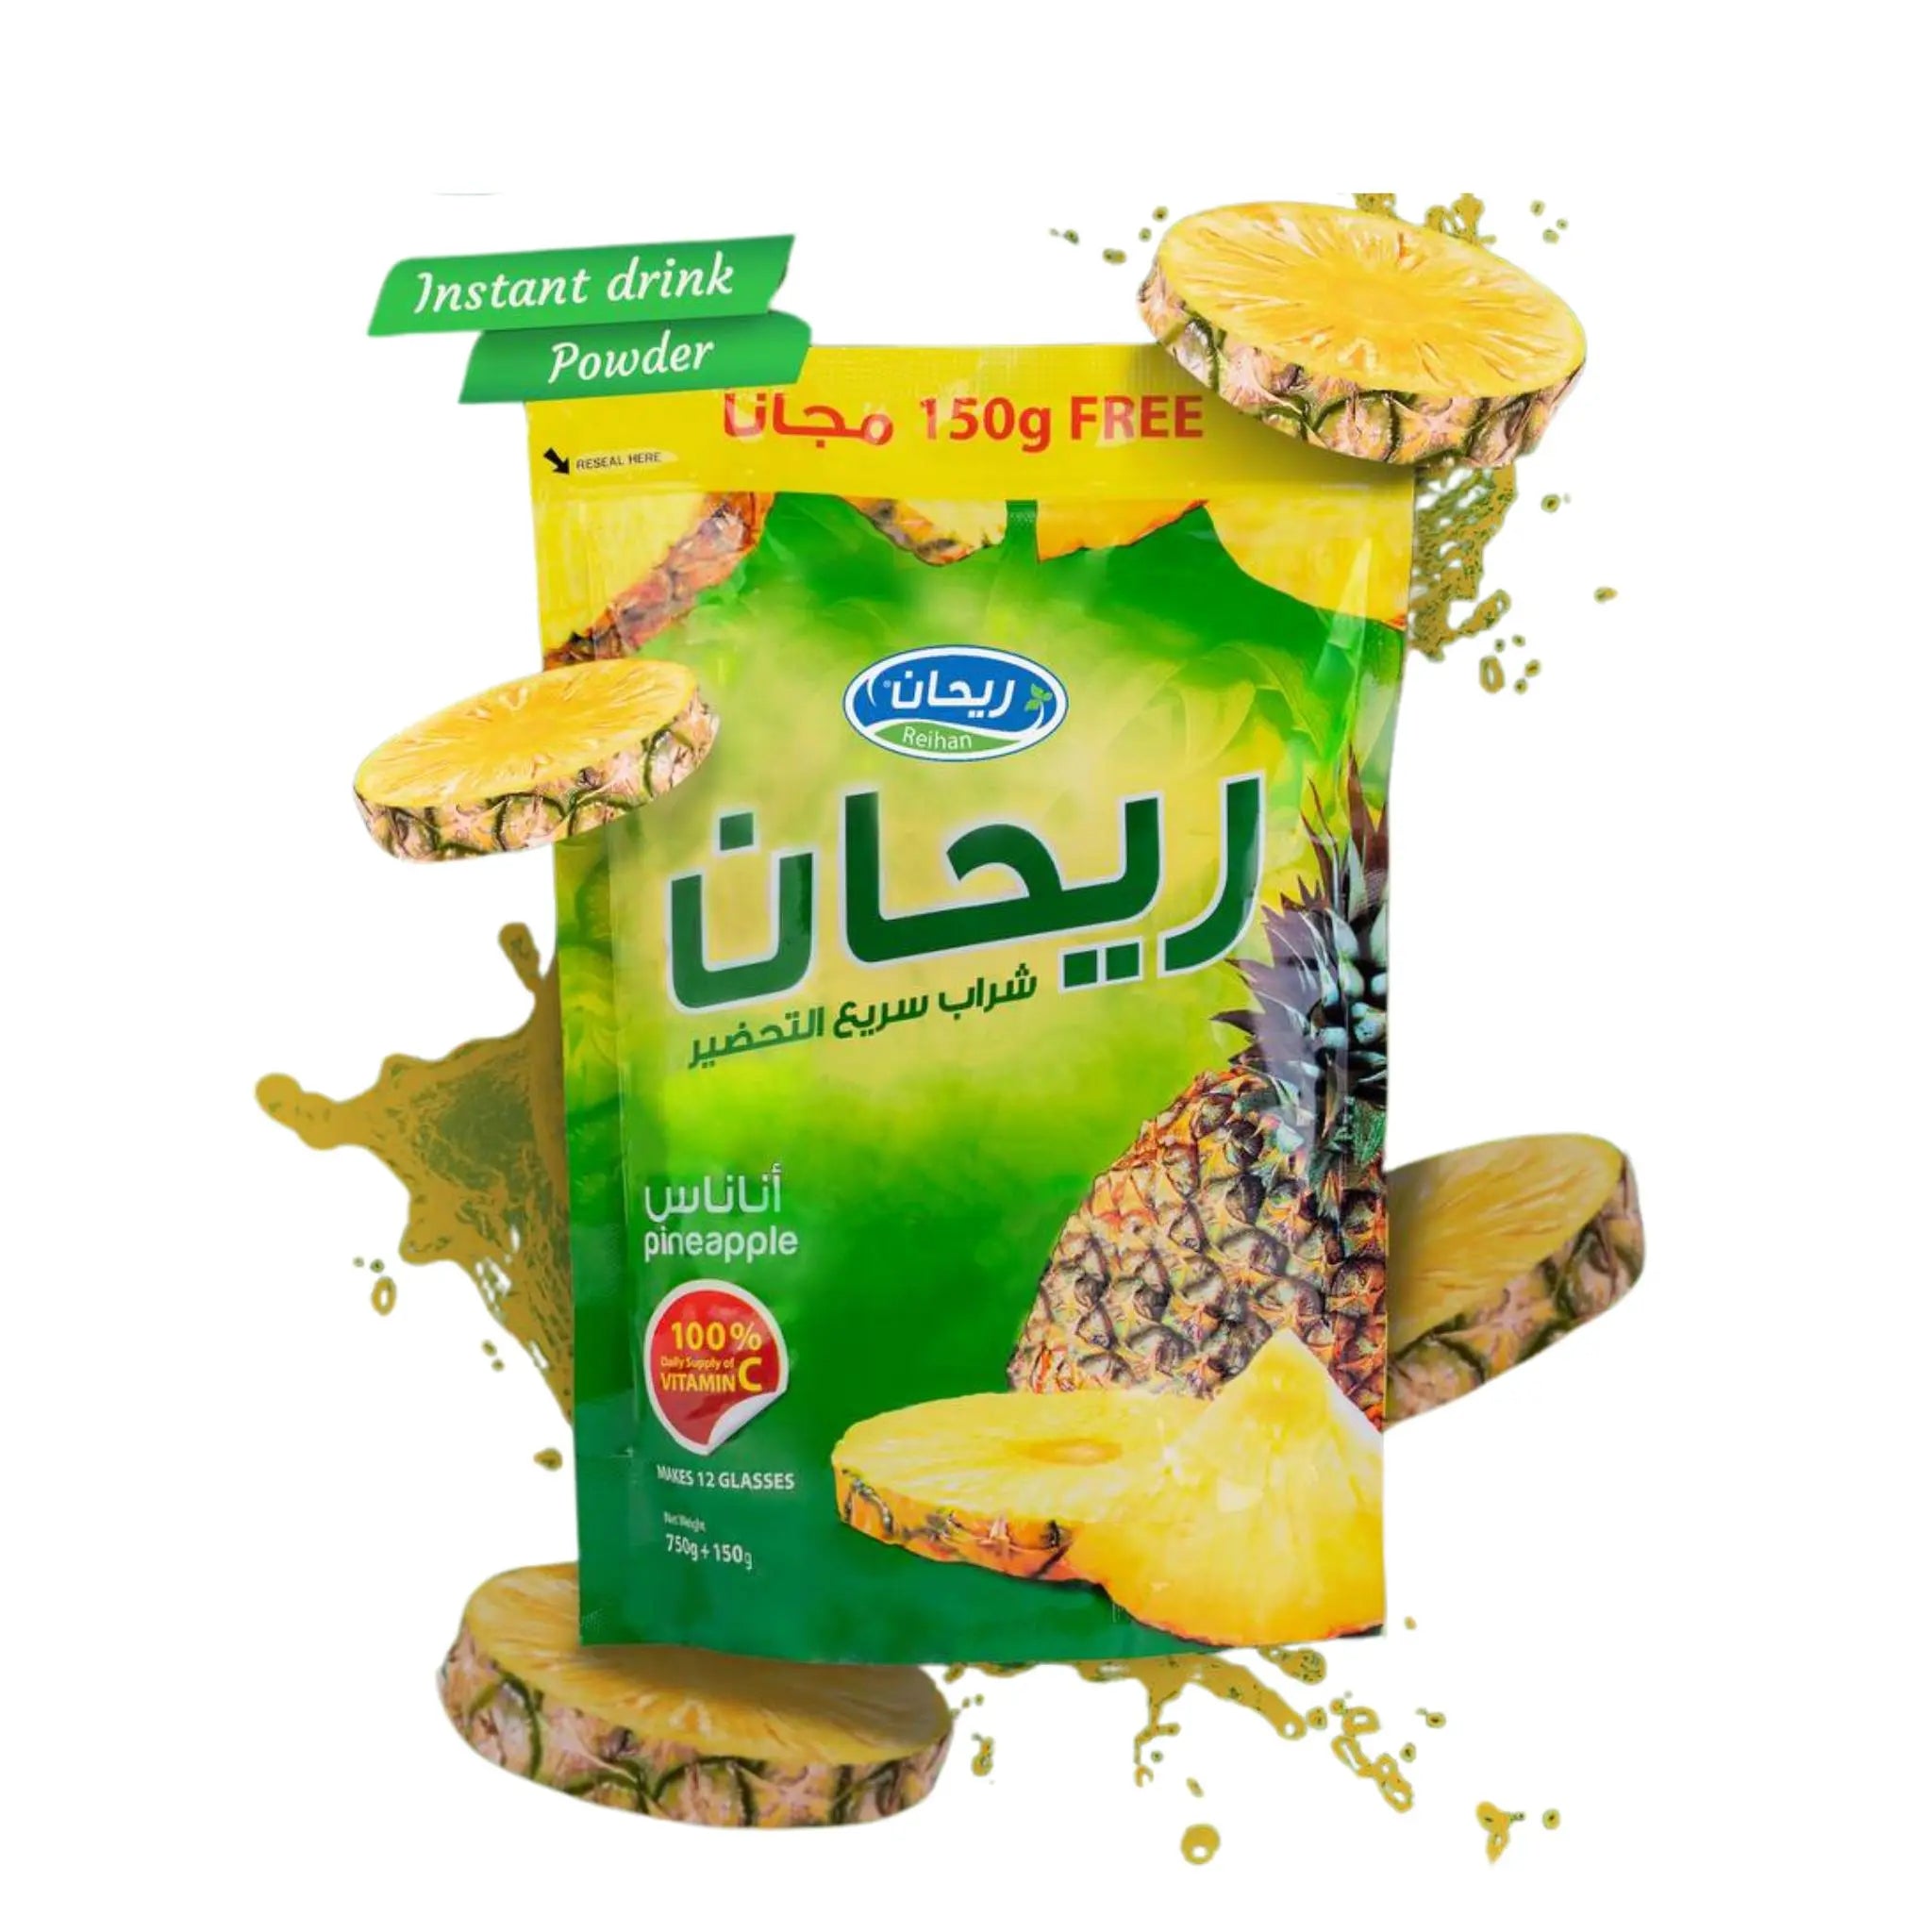 REIHAN INSTANT DRINK PINEAPPLE FLAVOUR 900G [POUCH]- Pack of 5 Marino.AE